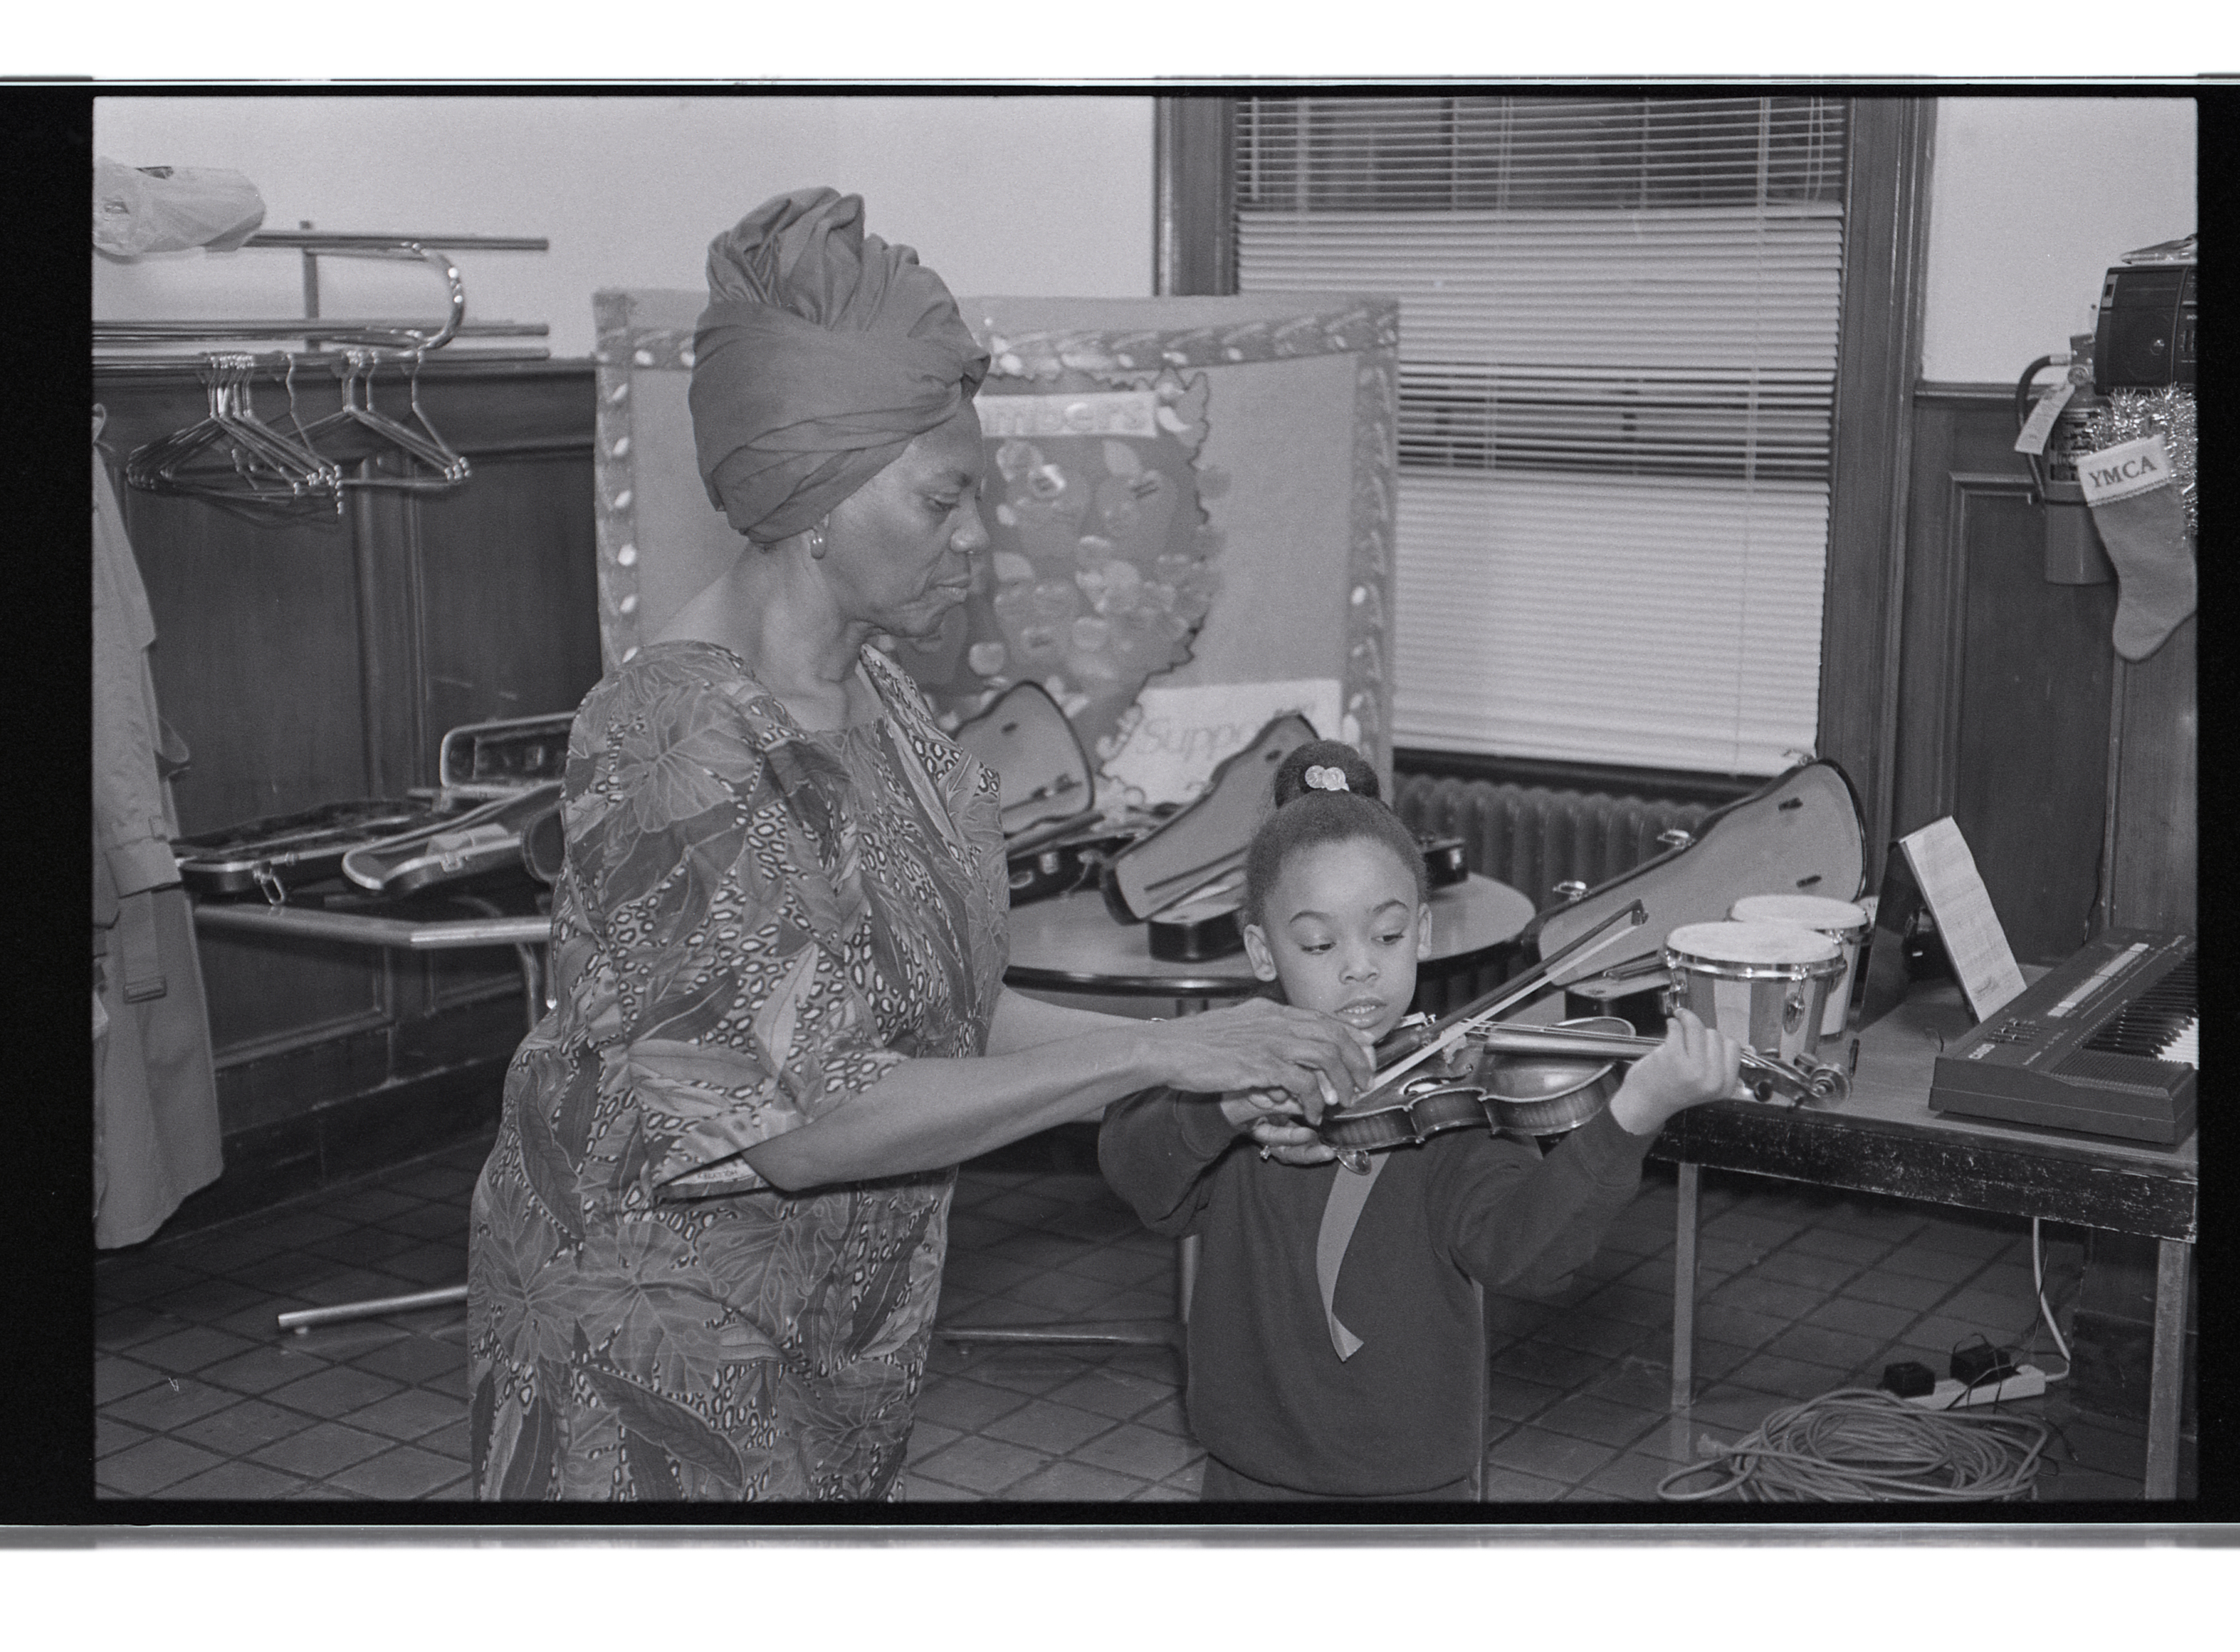 Dumisani offered music instruction to interested children, part of her effort to embed classical music in city neighborhoods. (University photo / Department of Rare Books, Special Collections, and Preservation)